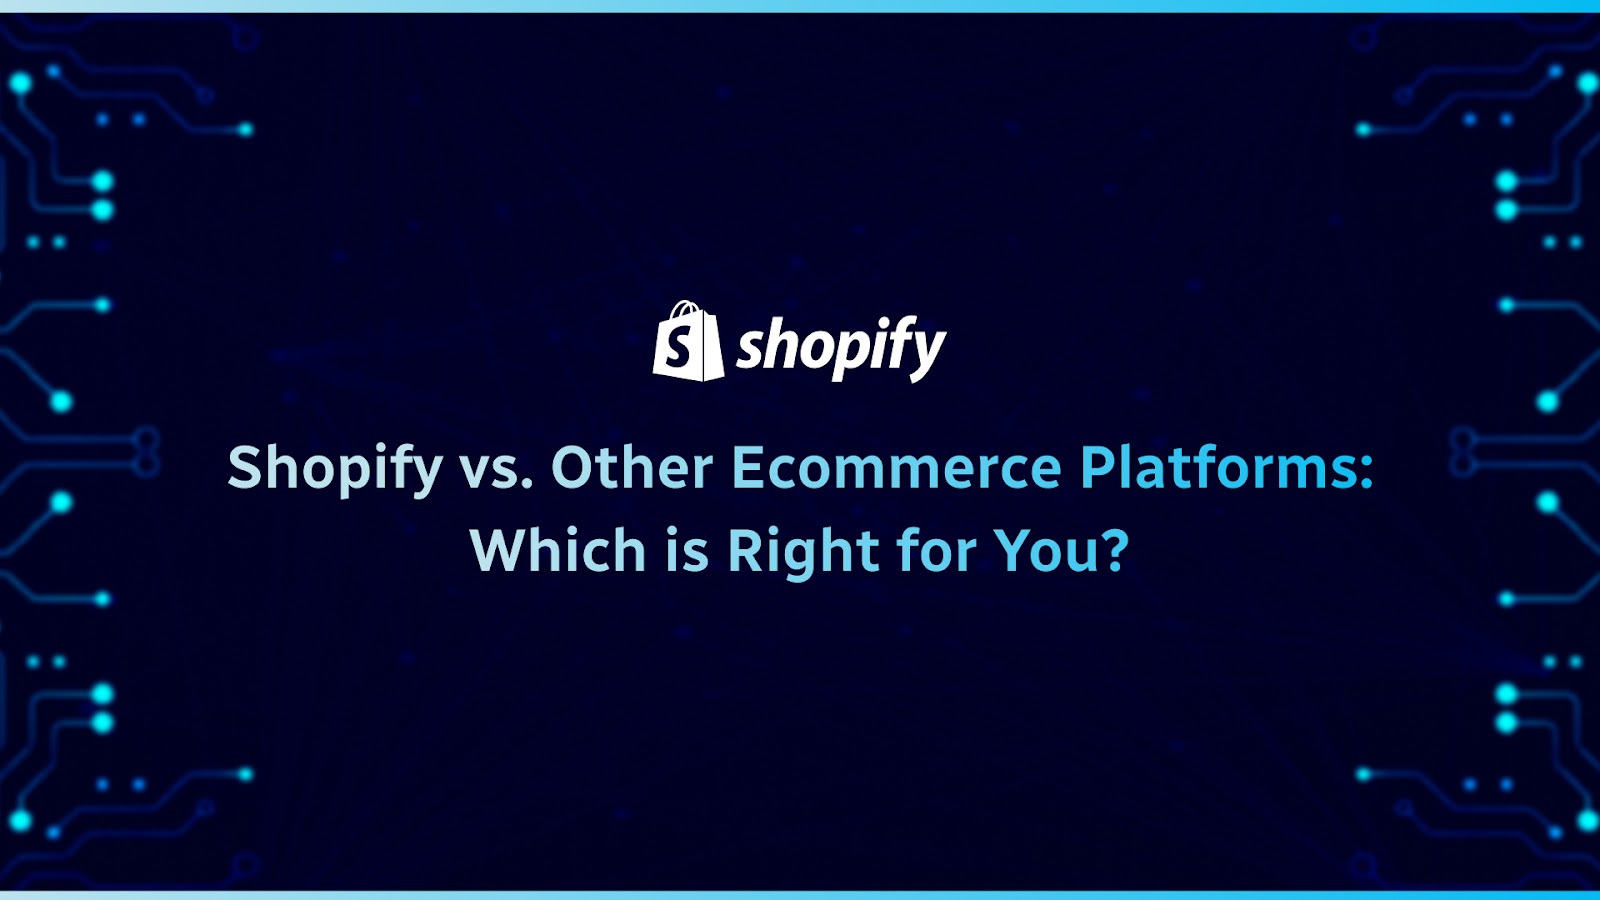 Shopify vs Other E-commerce Platforms Which is Right for You